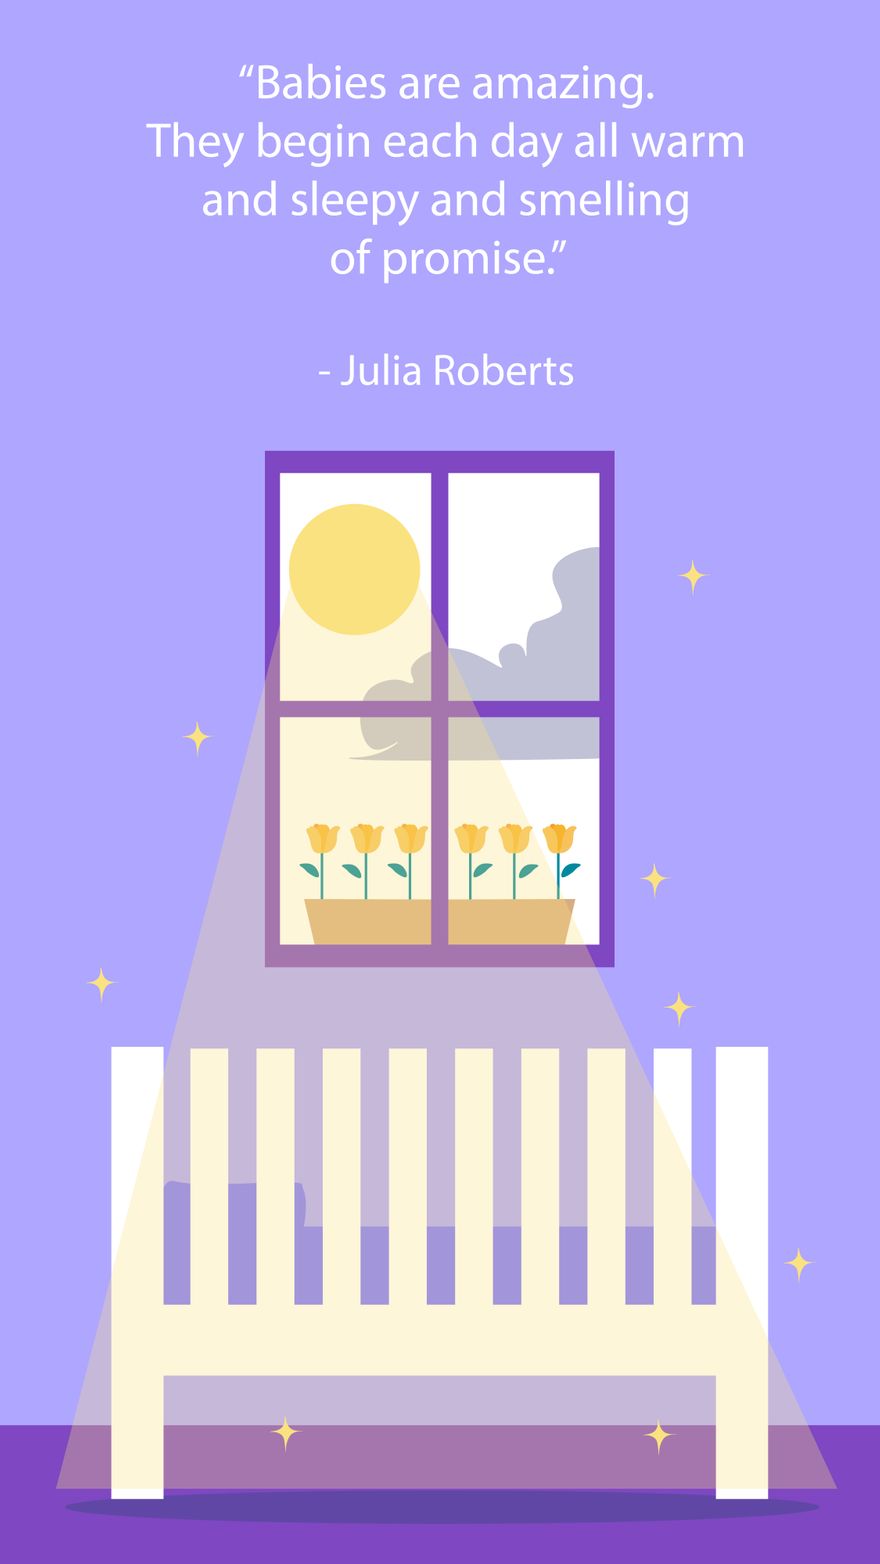 Free Baby Quote in Illustrator, JPG